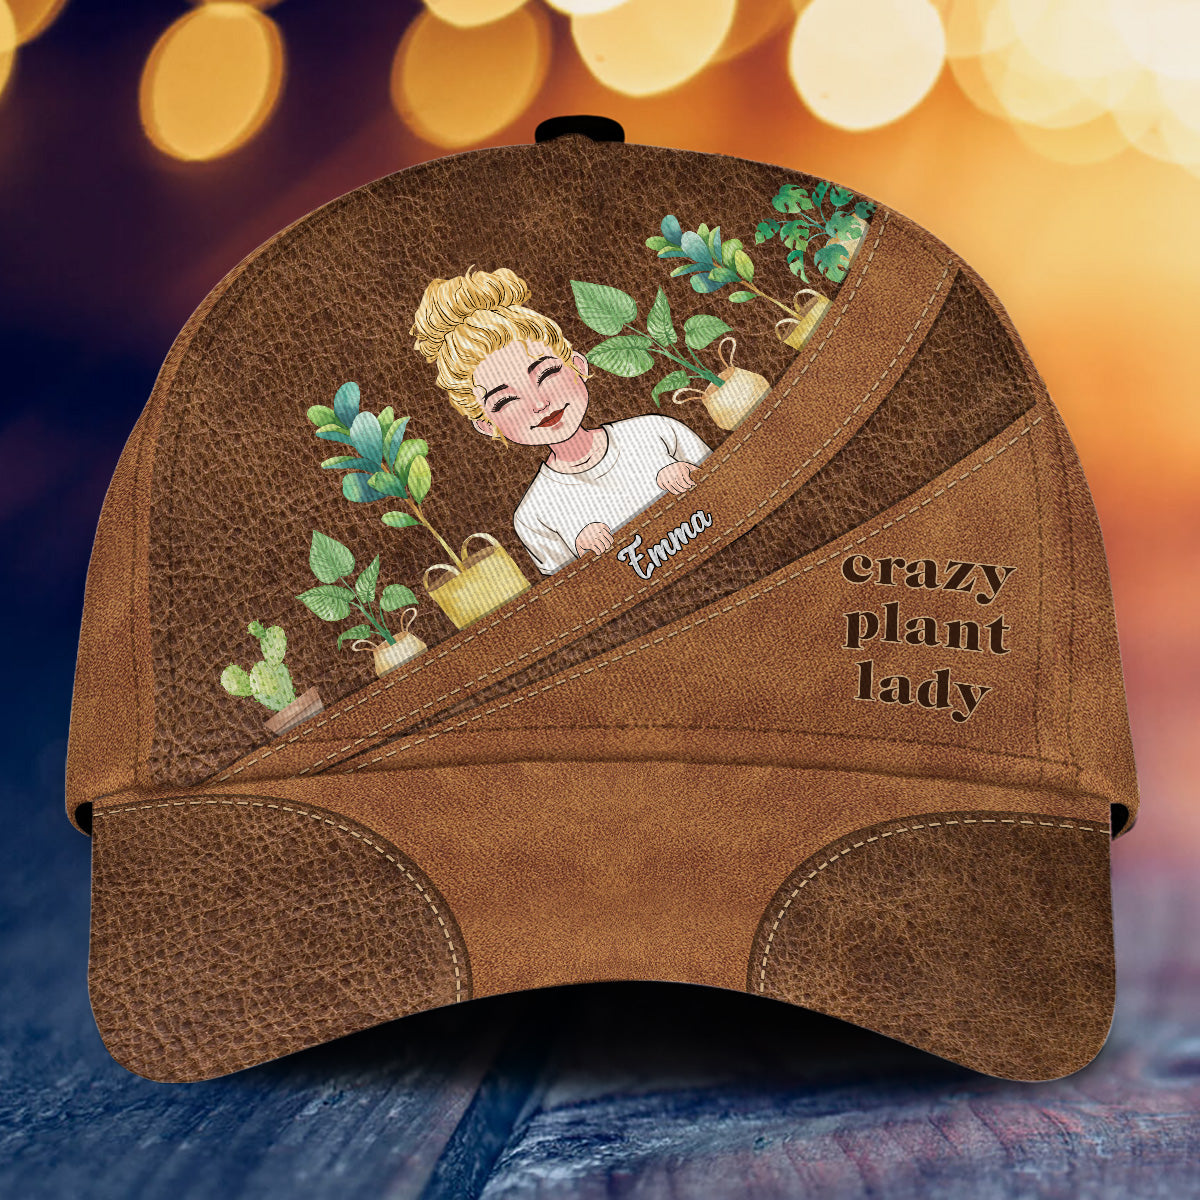 Crazy Plant Lady - Personalized Gardening Classic Cap